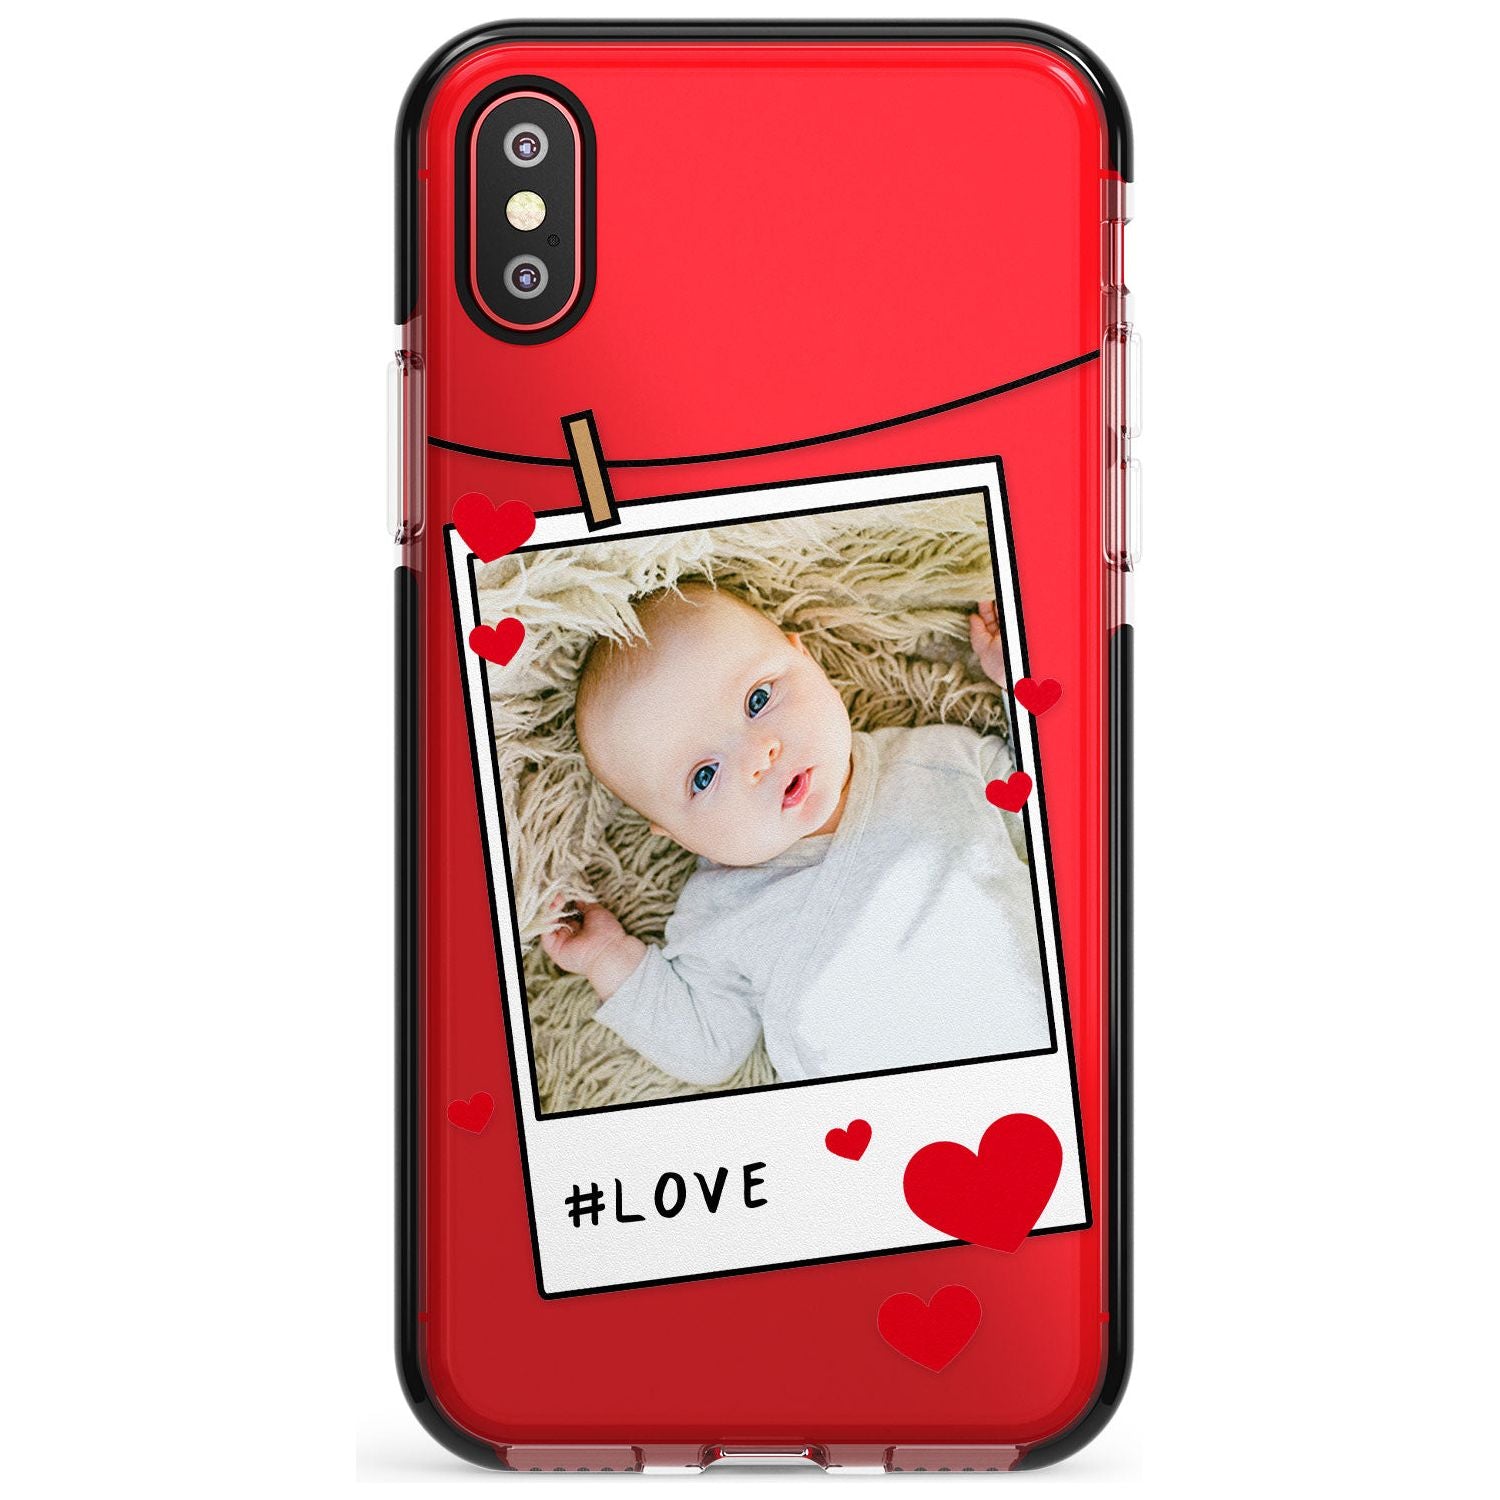 Love Instant Film Pink Fade Impact Phone Case for iPhone X XS Max XR